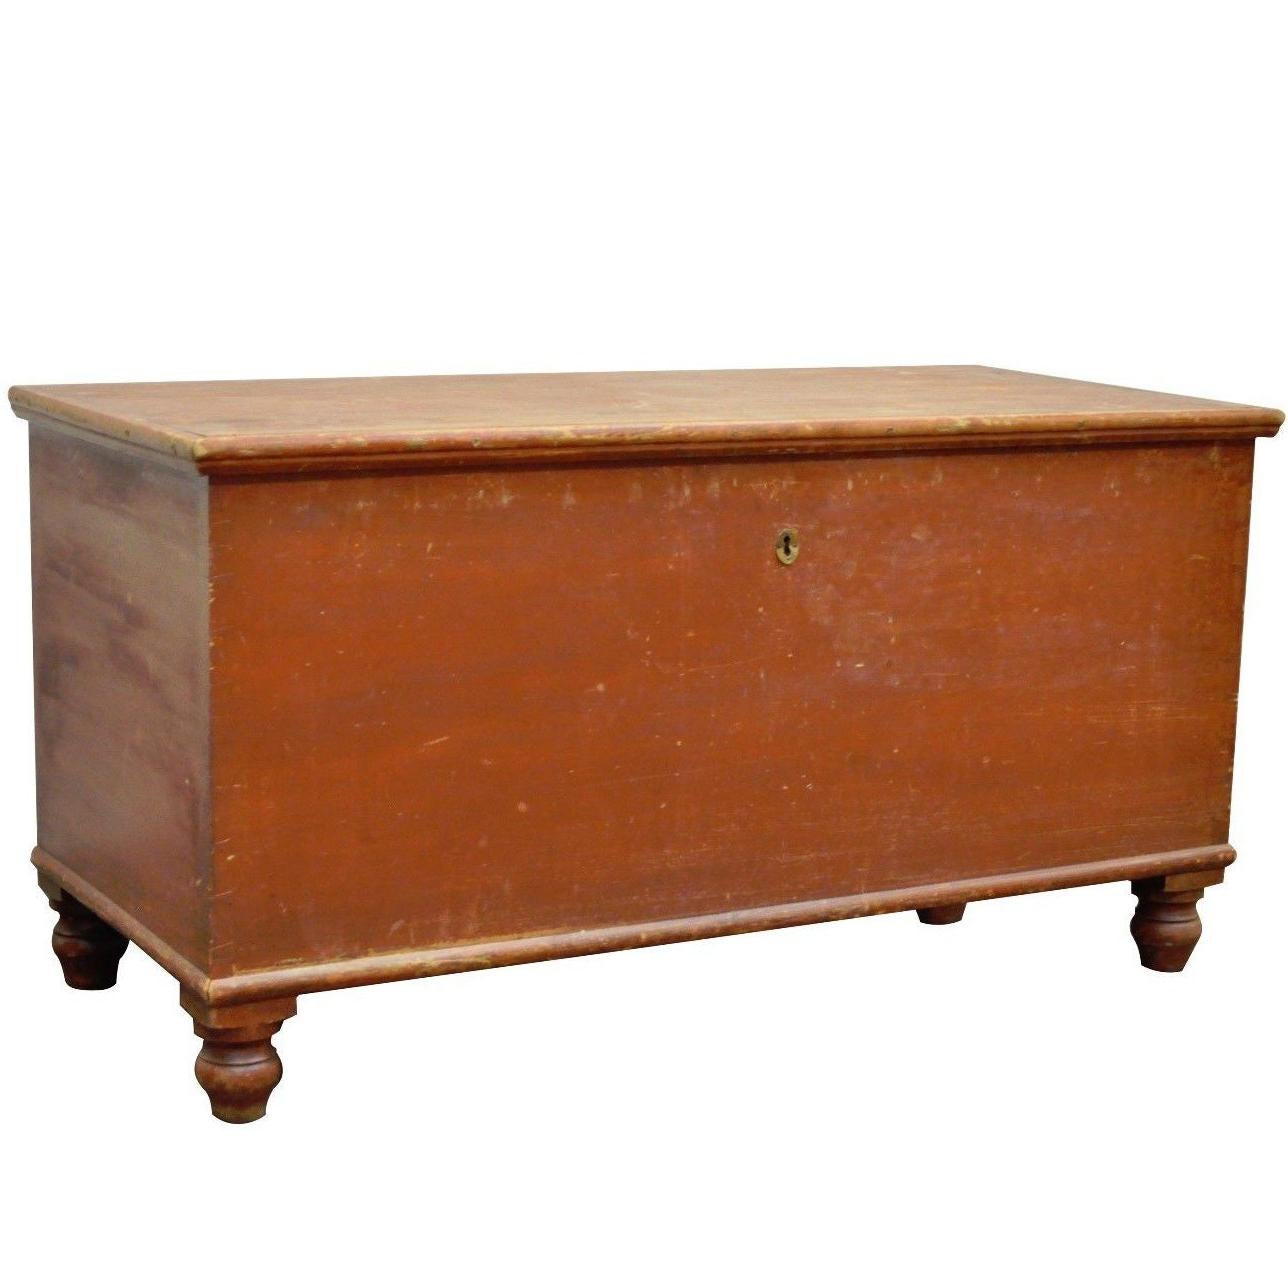 Antique Pennsylvania Dovetailed Red Painted Rustic Primitive Blanket Chest Trunk For Sale